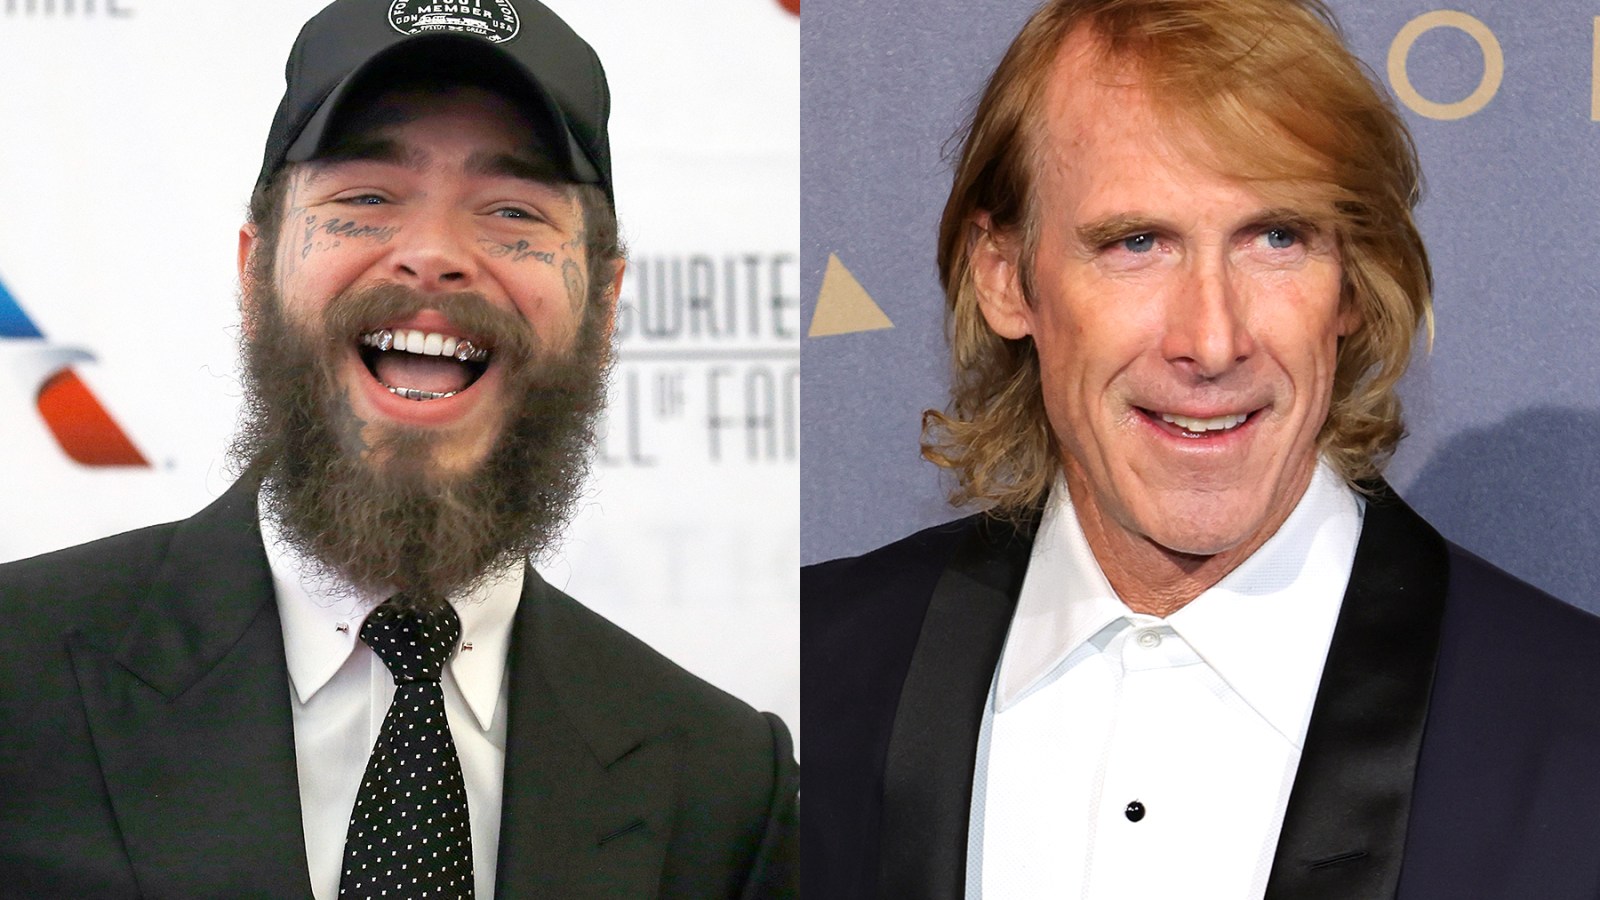 Post Malone and Michael Bay Are Cooking Up Something Crazy With Demons and Trucks